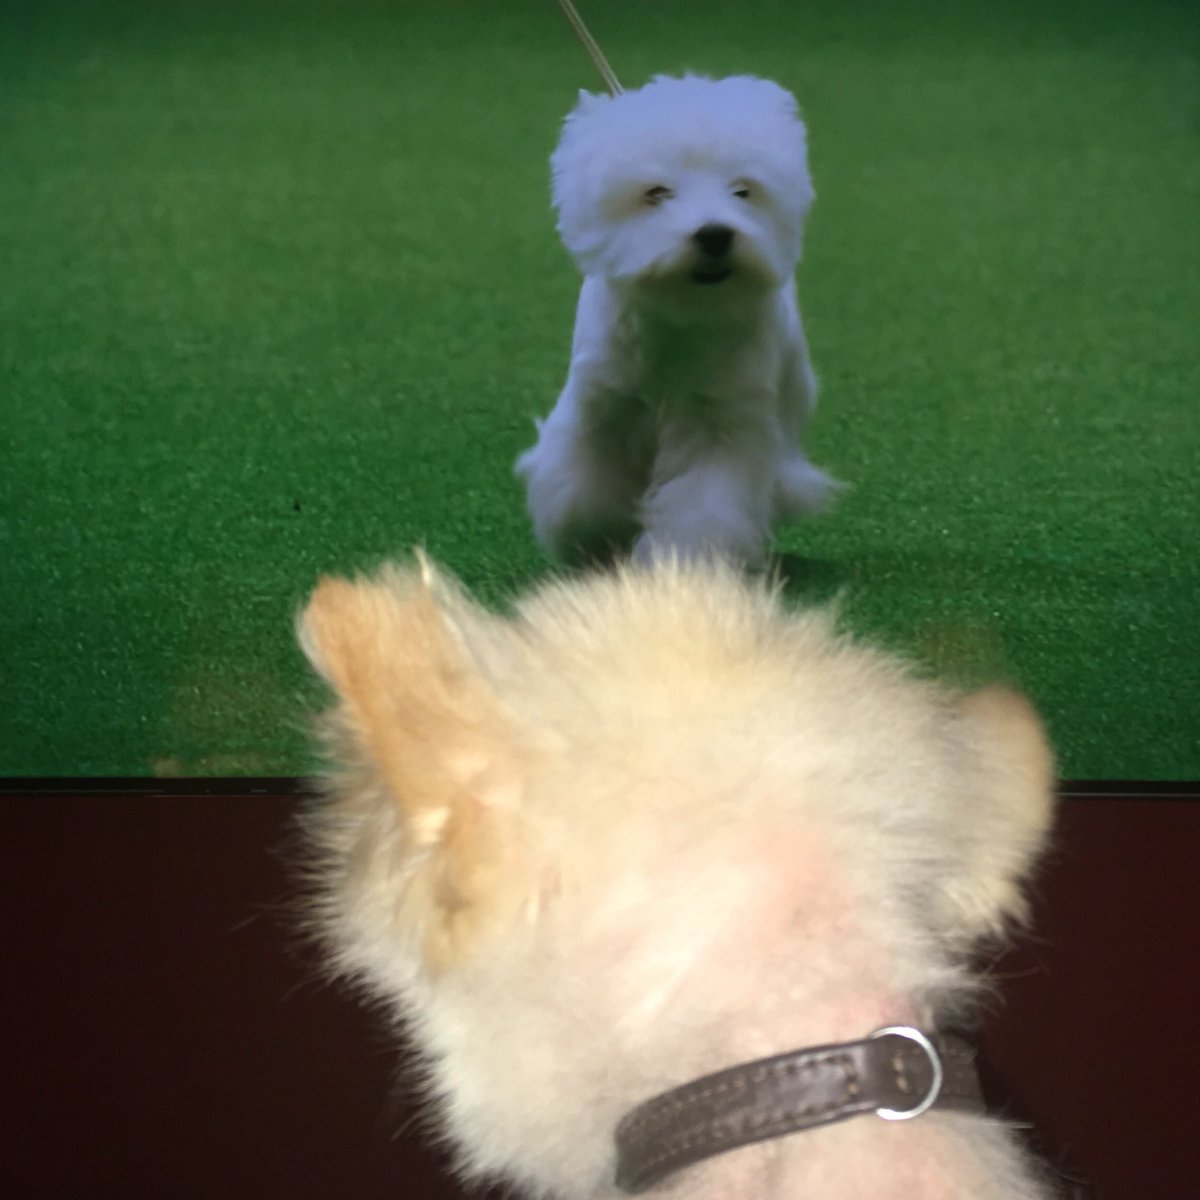 He's in love with Devon the westie. @crufts ❤️ https://t.co/YASErfVpv4